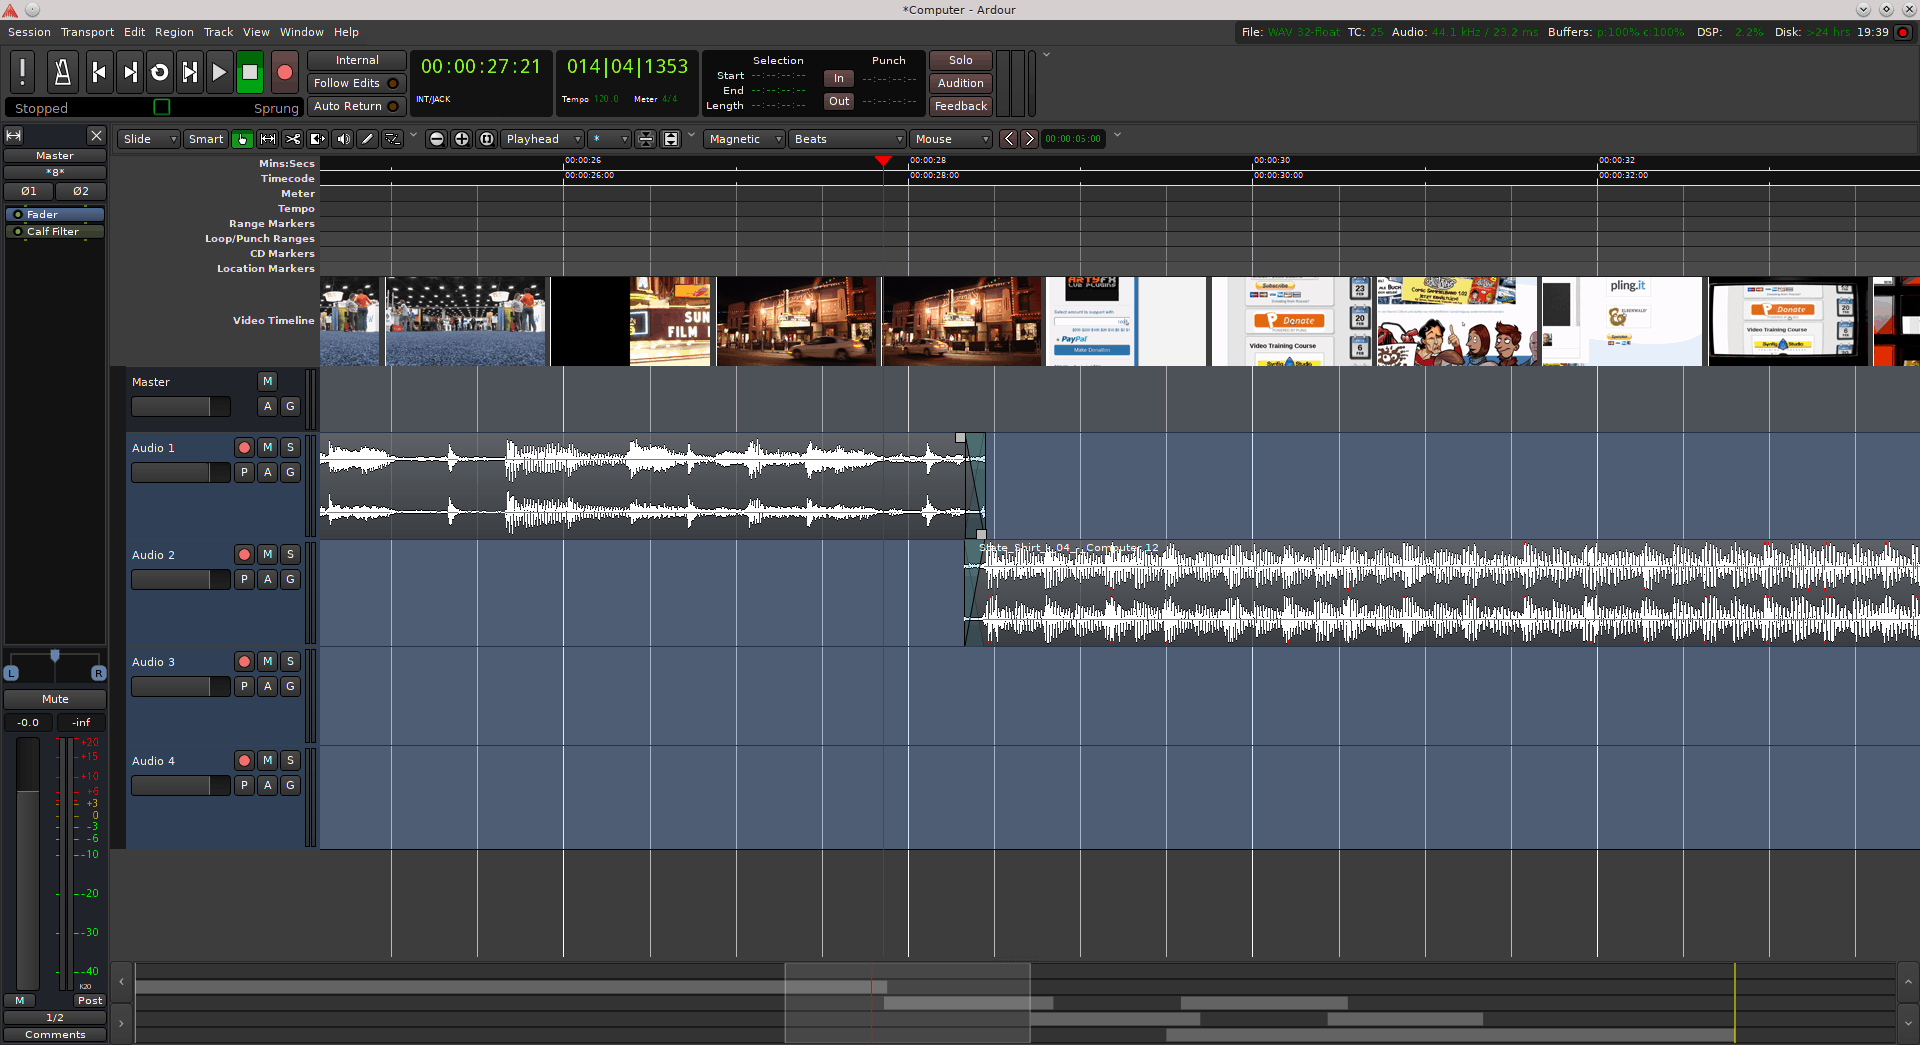 Ardour is great for editing the soundtrack for your videos. With harvid installed, it even allows you to see the frames so you can synch the beats with the cuts.